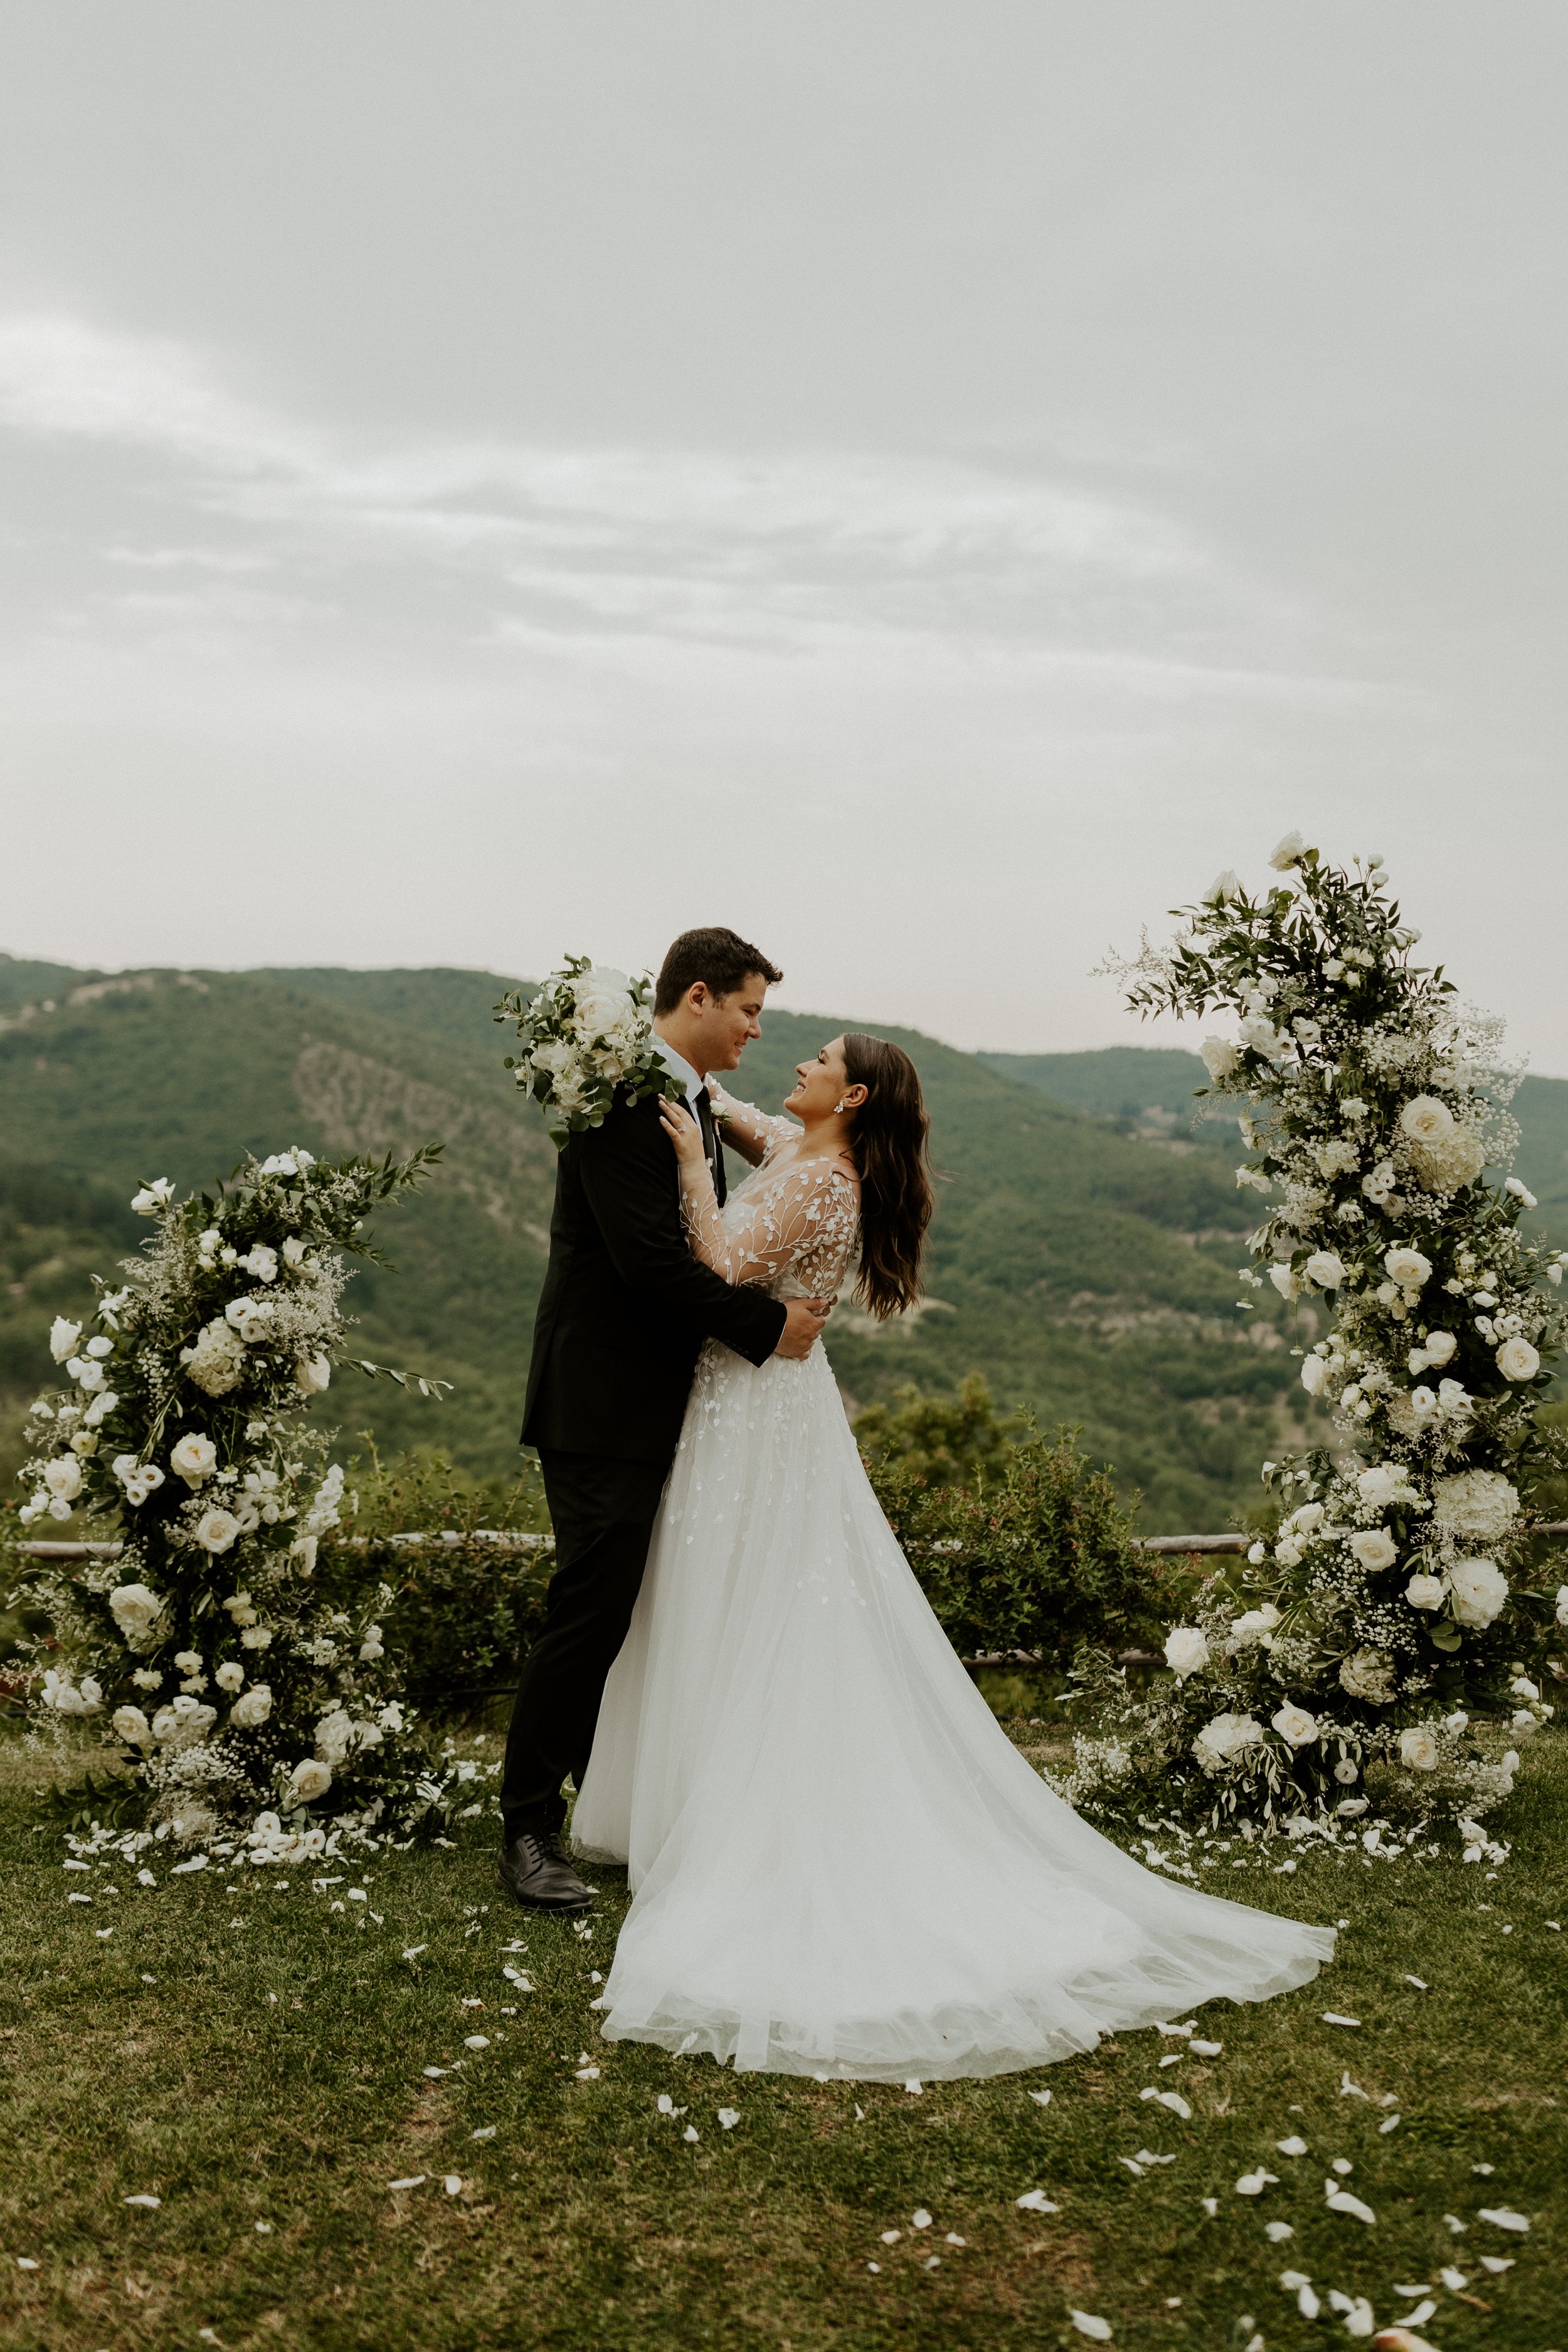 a tuscany wedding with bright white florals and breathtaking views in this italian countryside destination wedding